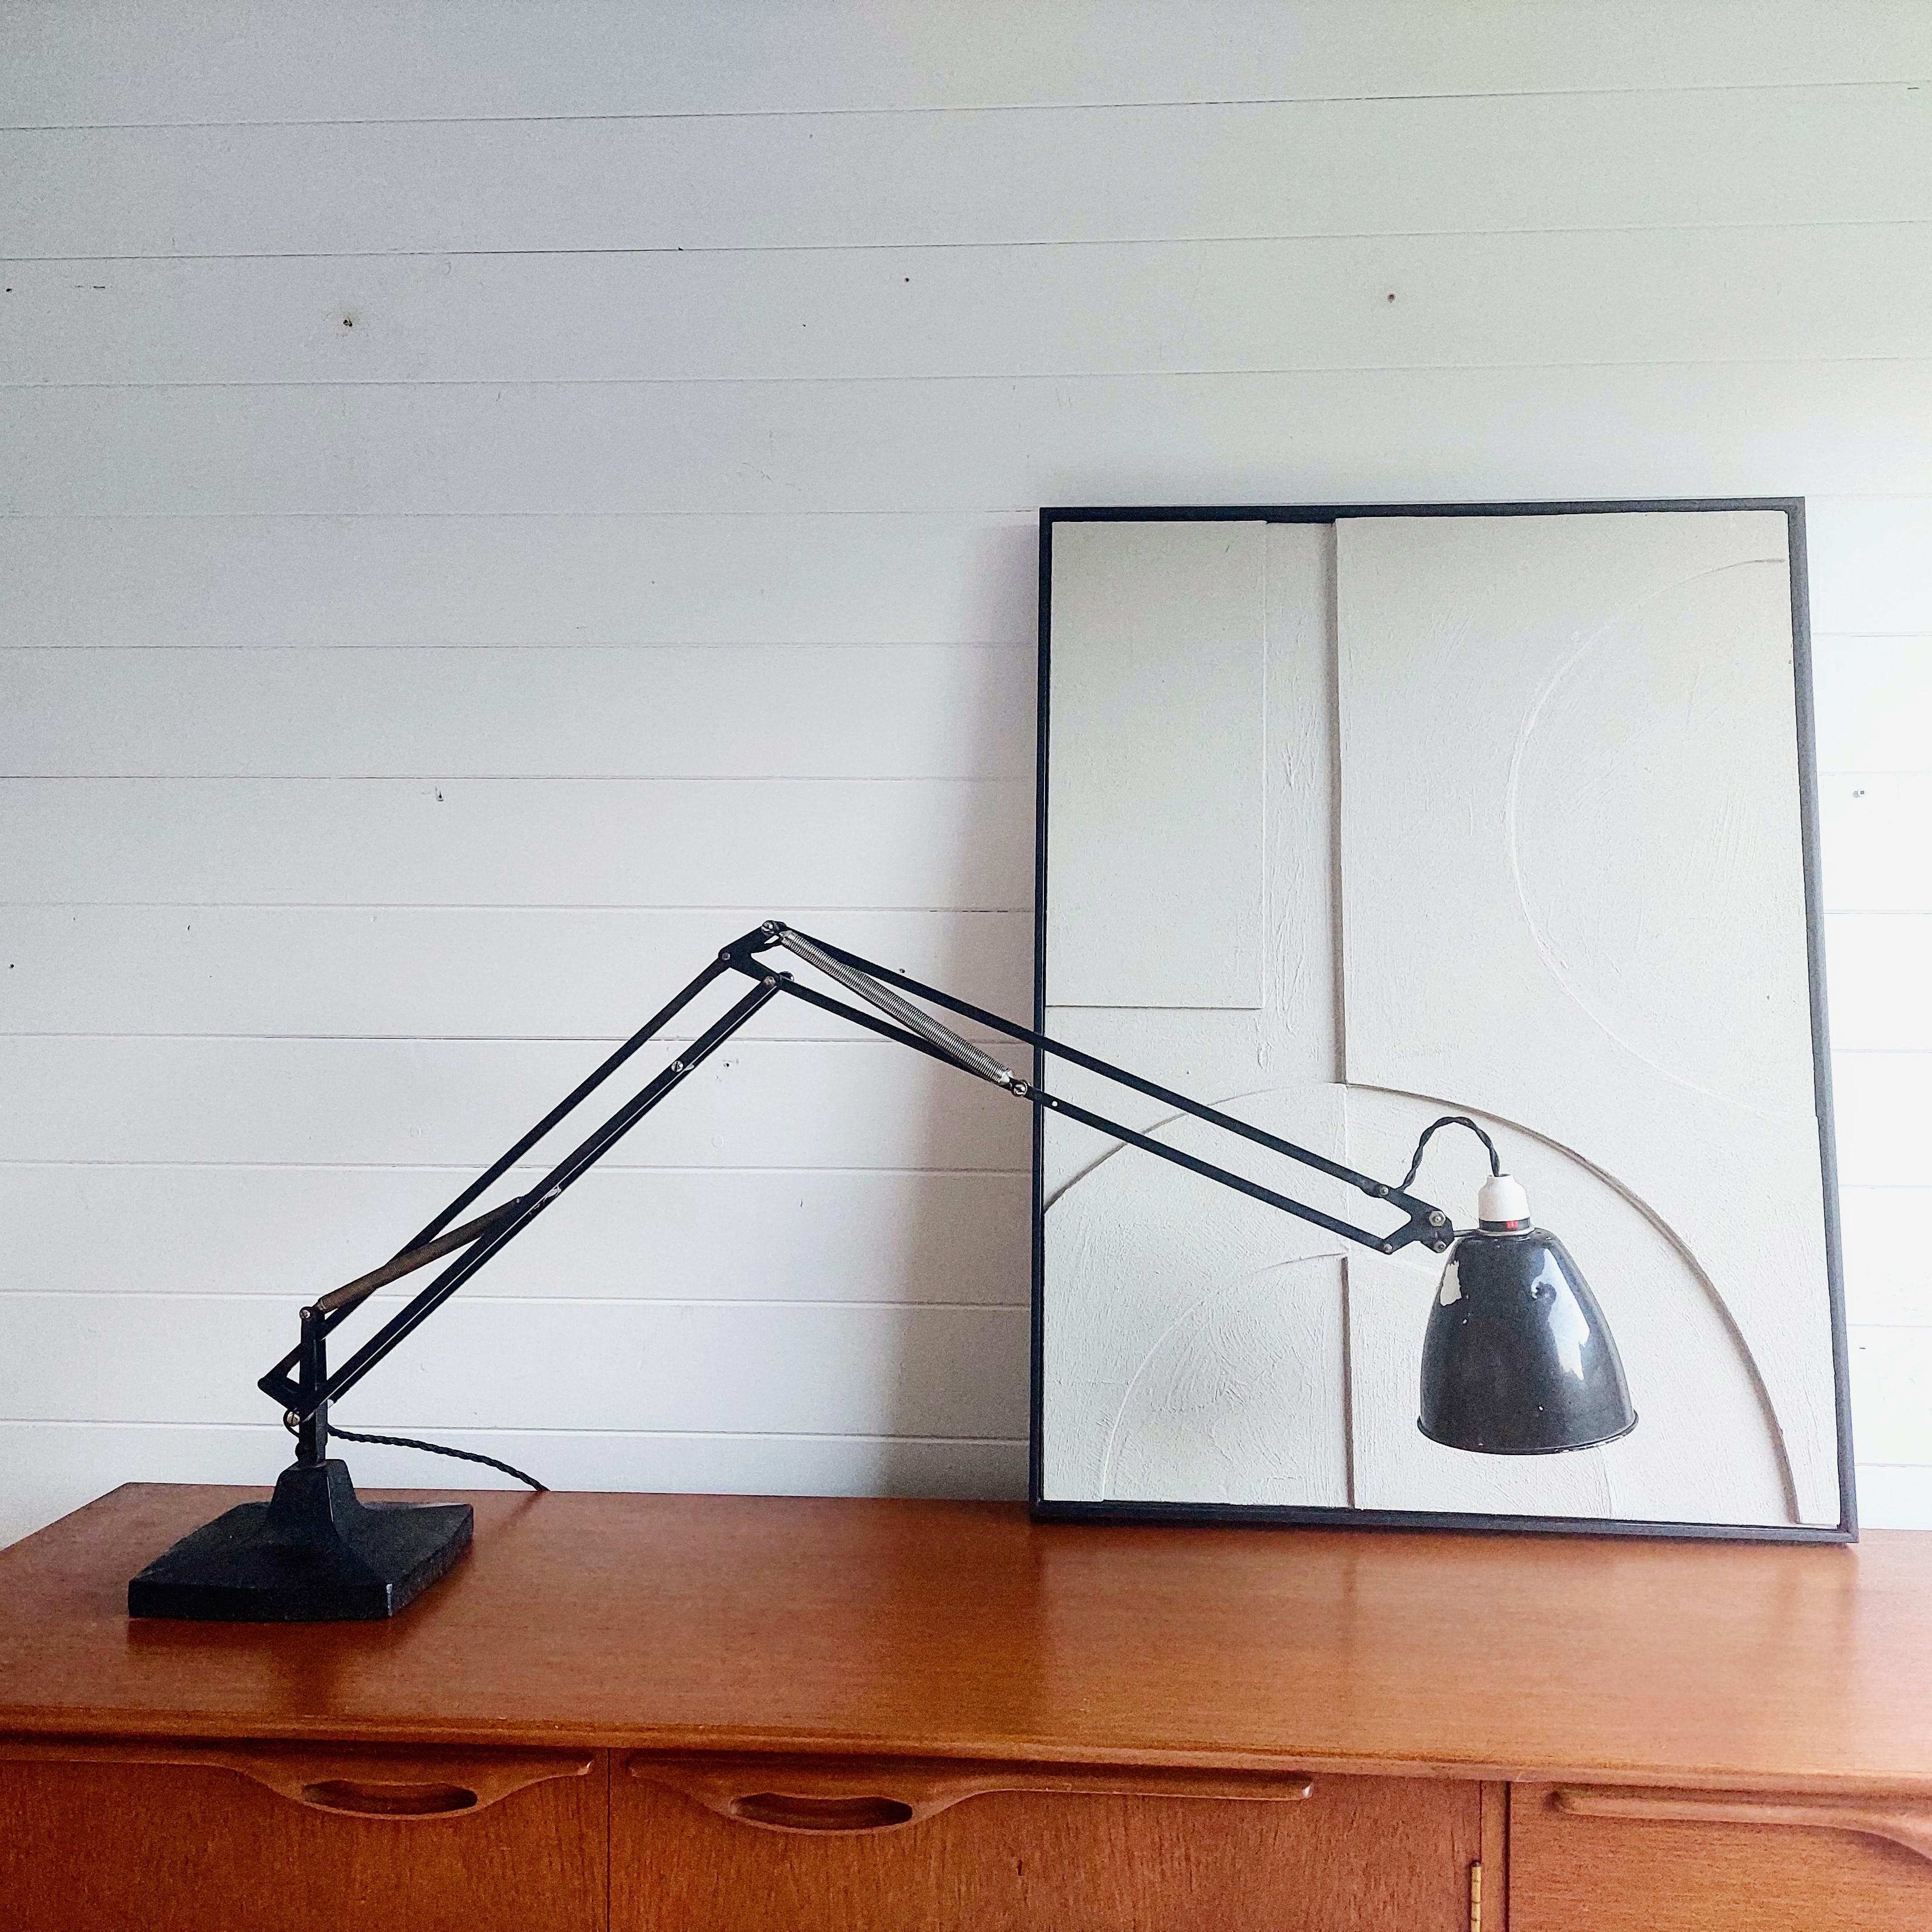 Made between 1933 and 1968, this is the iconic Model 1029 Anglepoise from Herbert Terry & Sons. 
Iconic design classics with heavy cast iron bases, original black paintwork, chrome springs & fittings & tulip shades.
Good, untouched & exceptionally